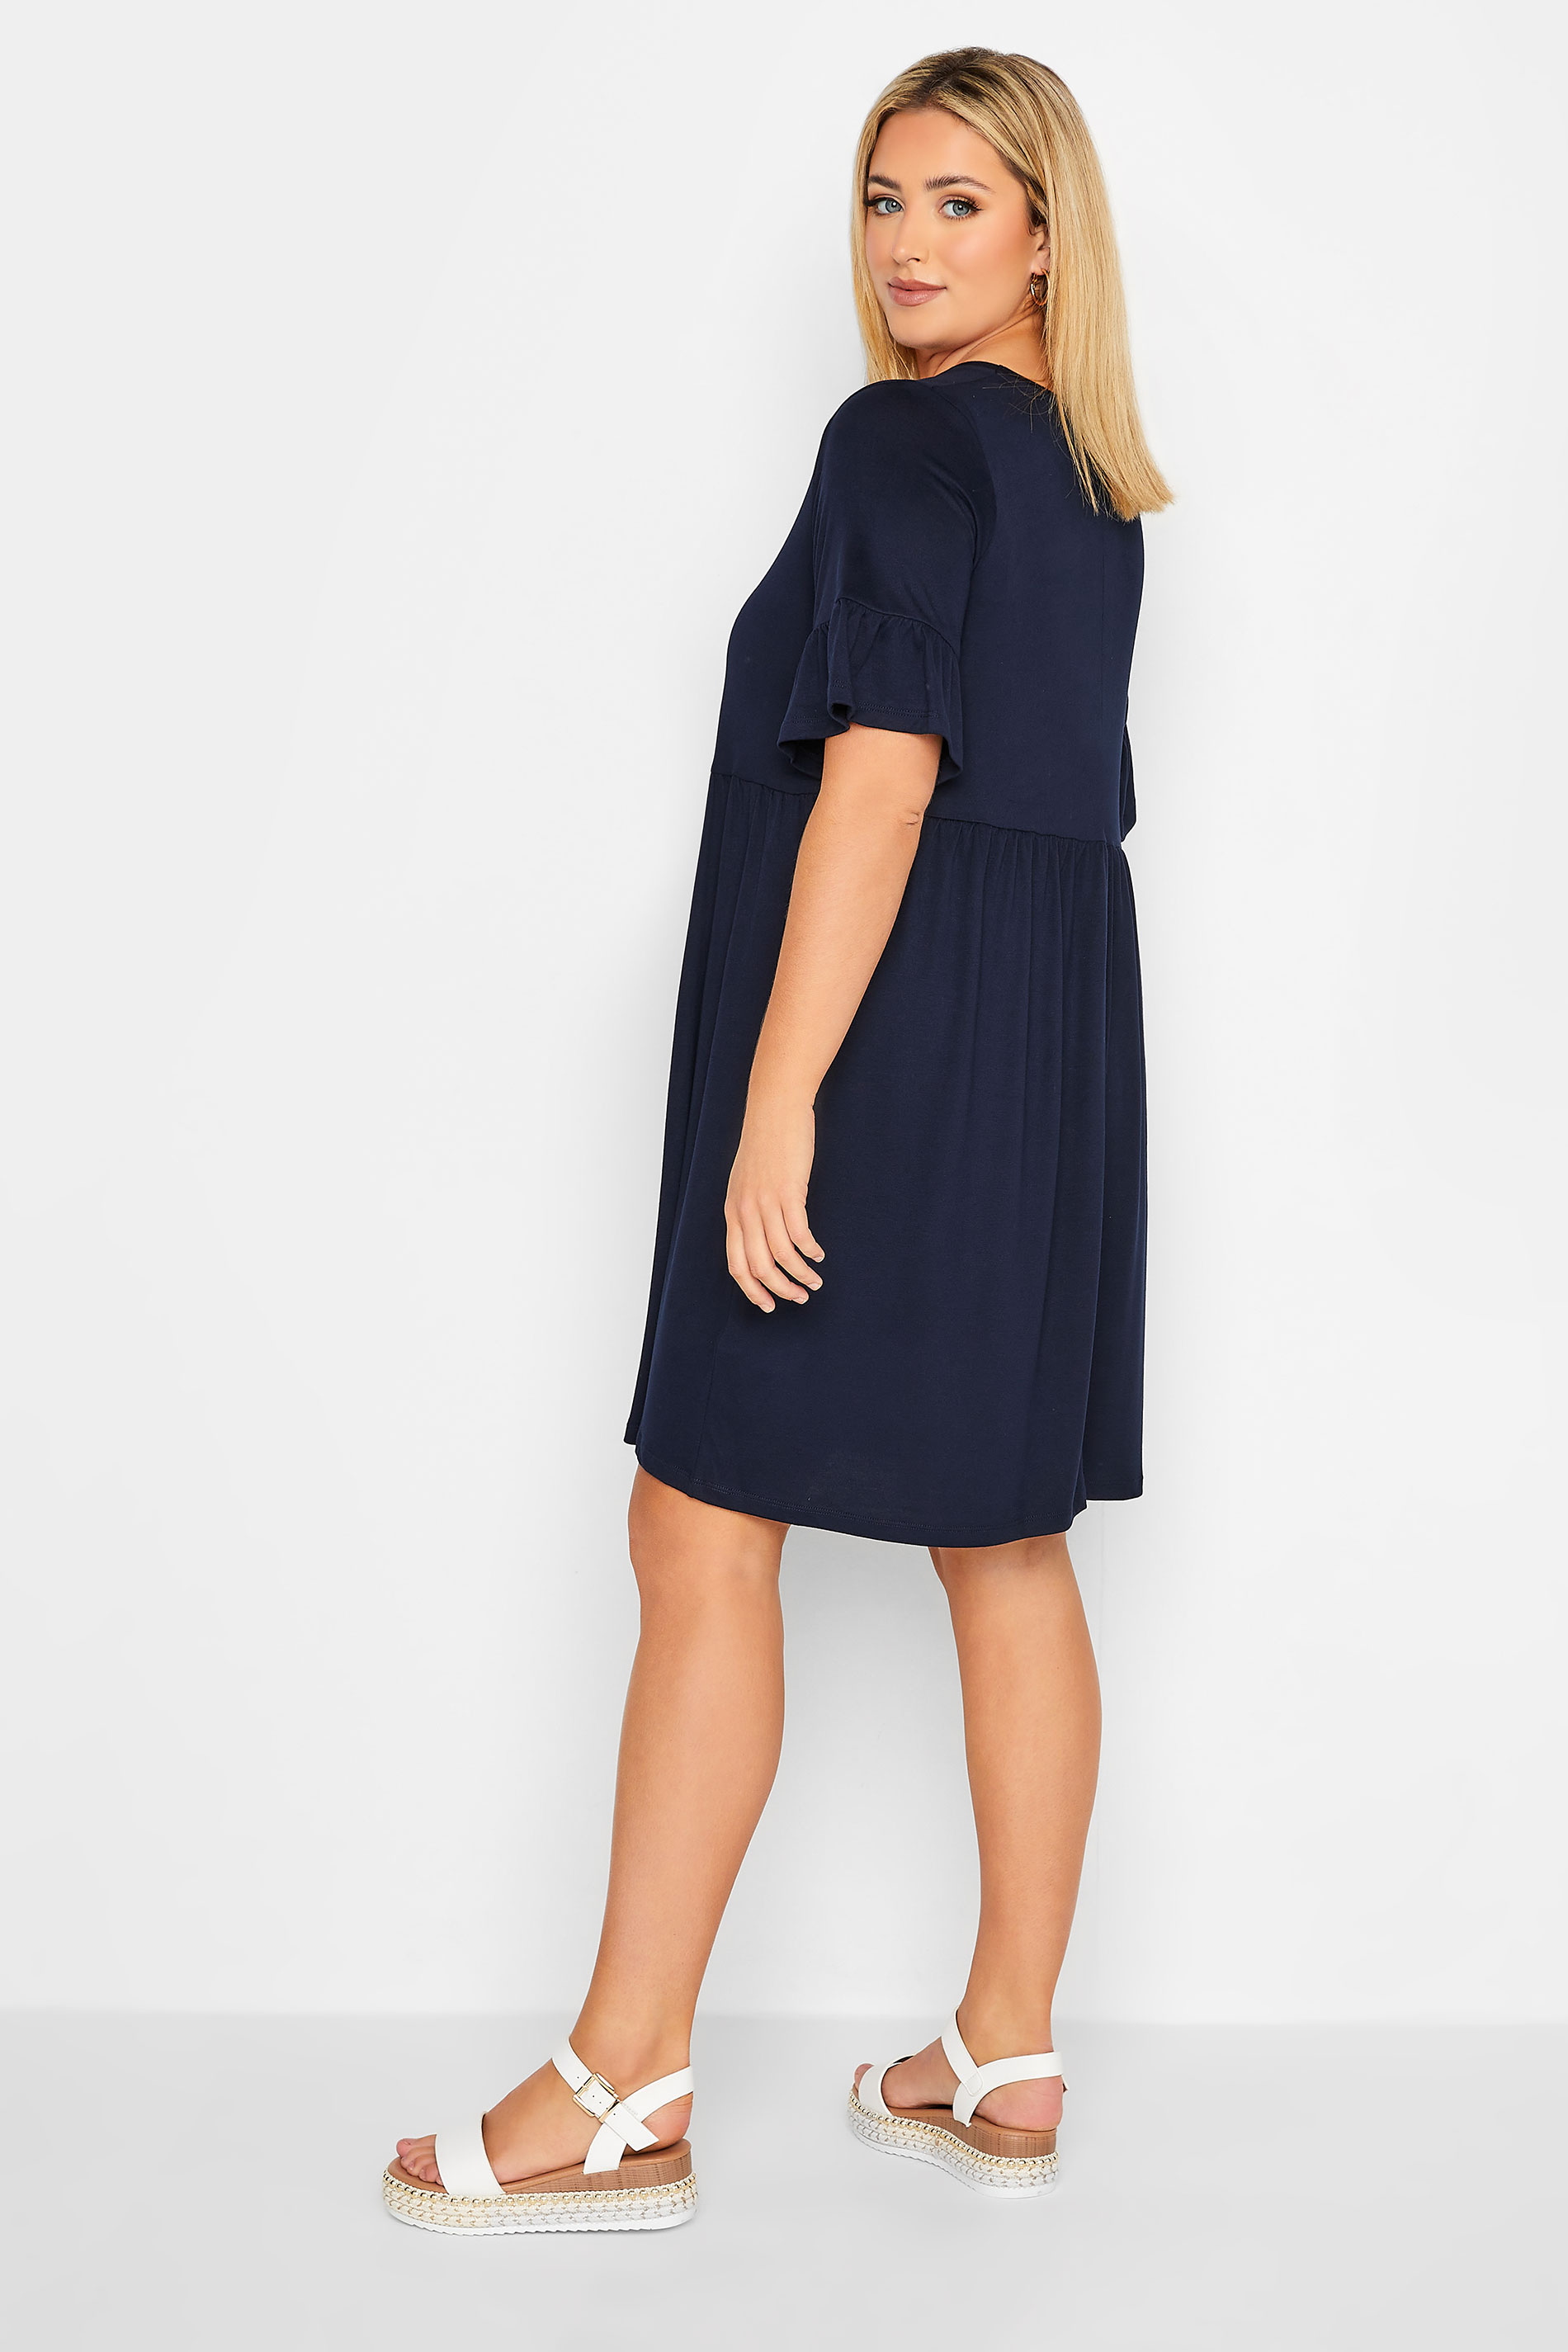 YOURS Plus Size Navy Blue Frill Sleeve Smock Dress | Yours Clothing 3